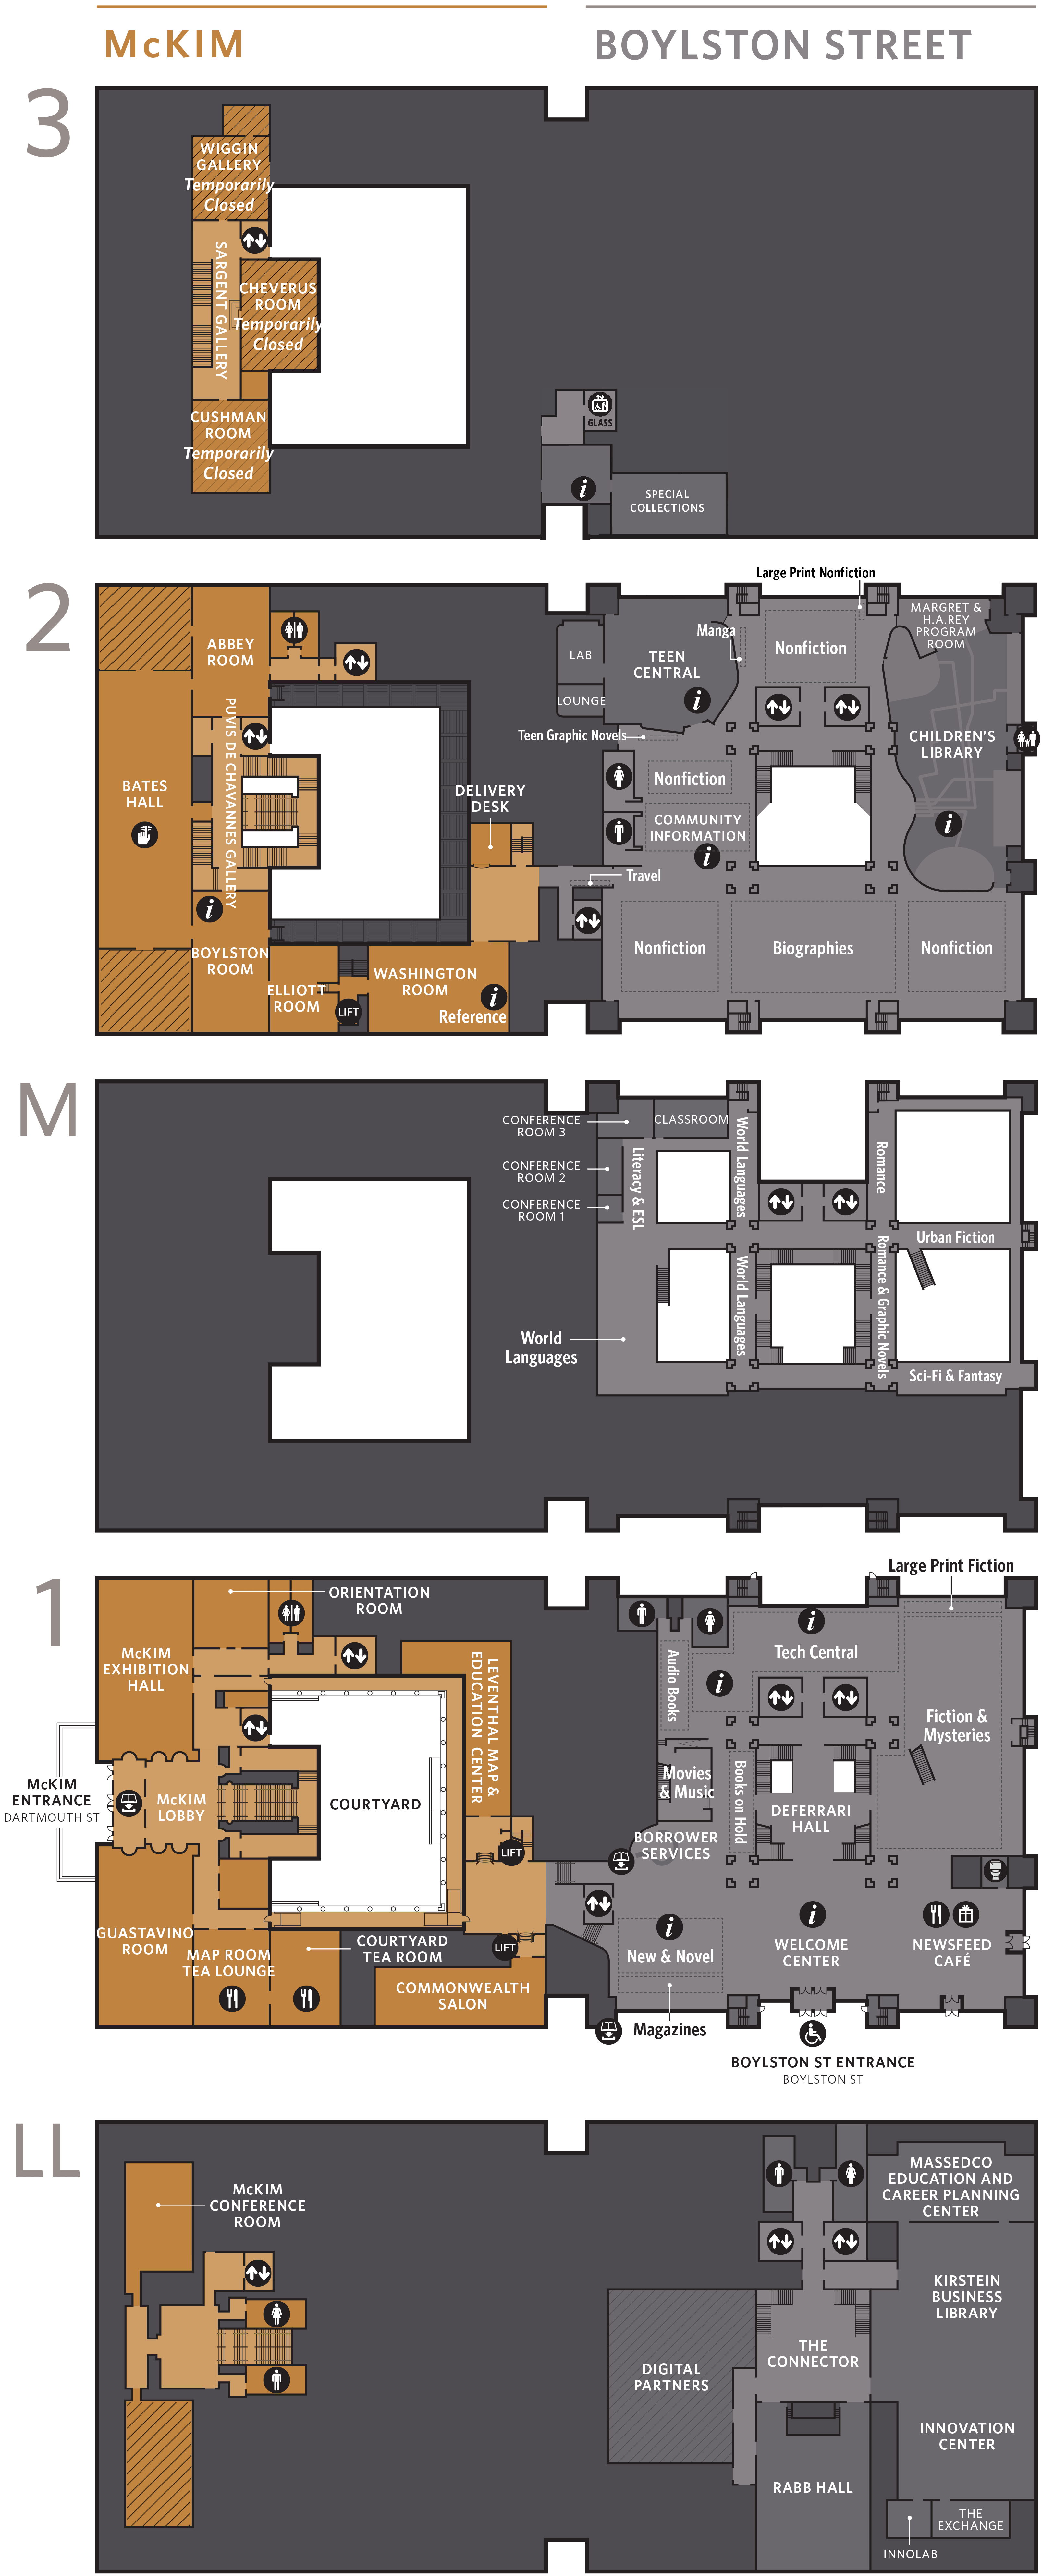 Map of the Central Library at Copley Square